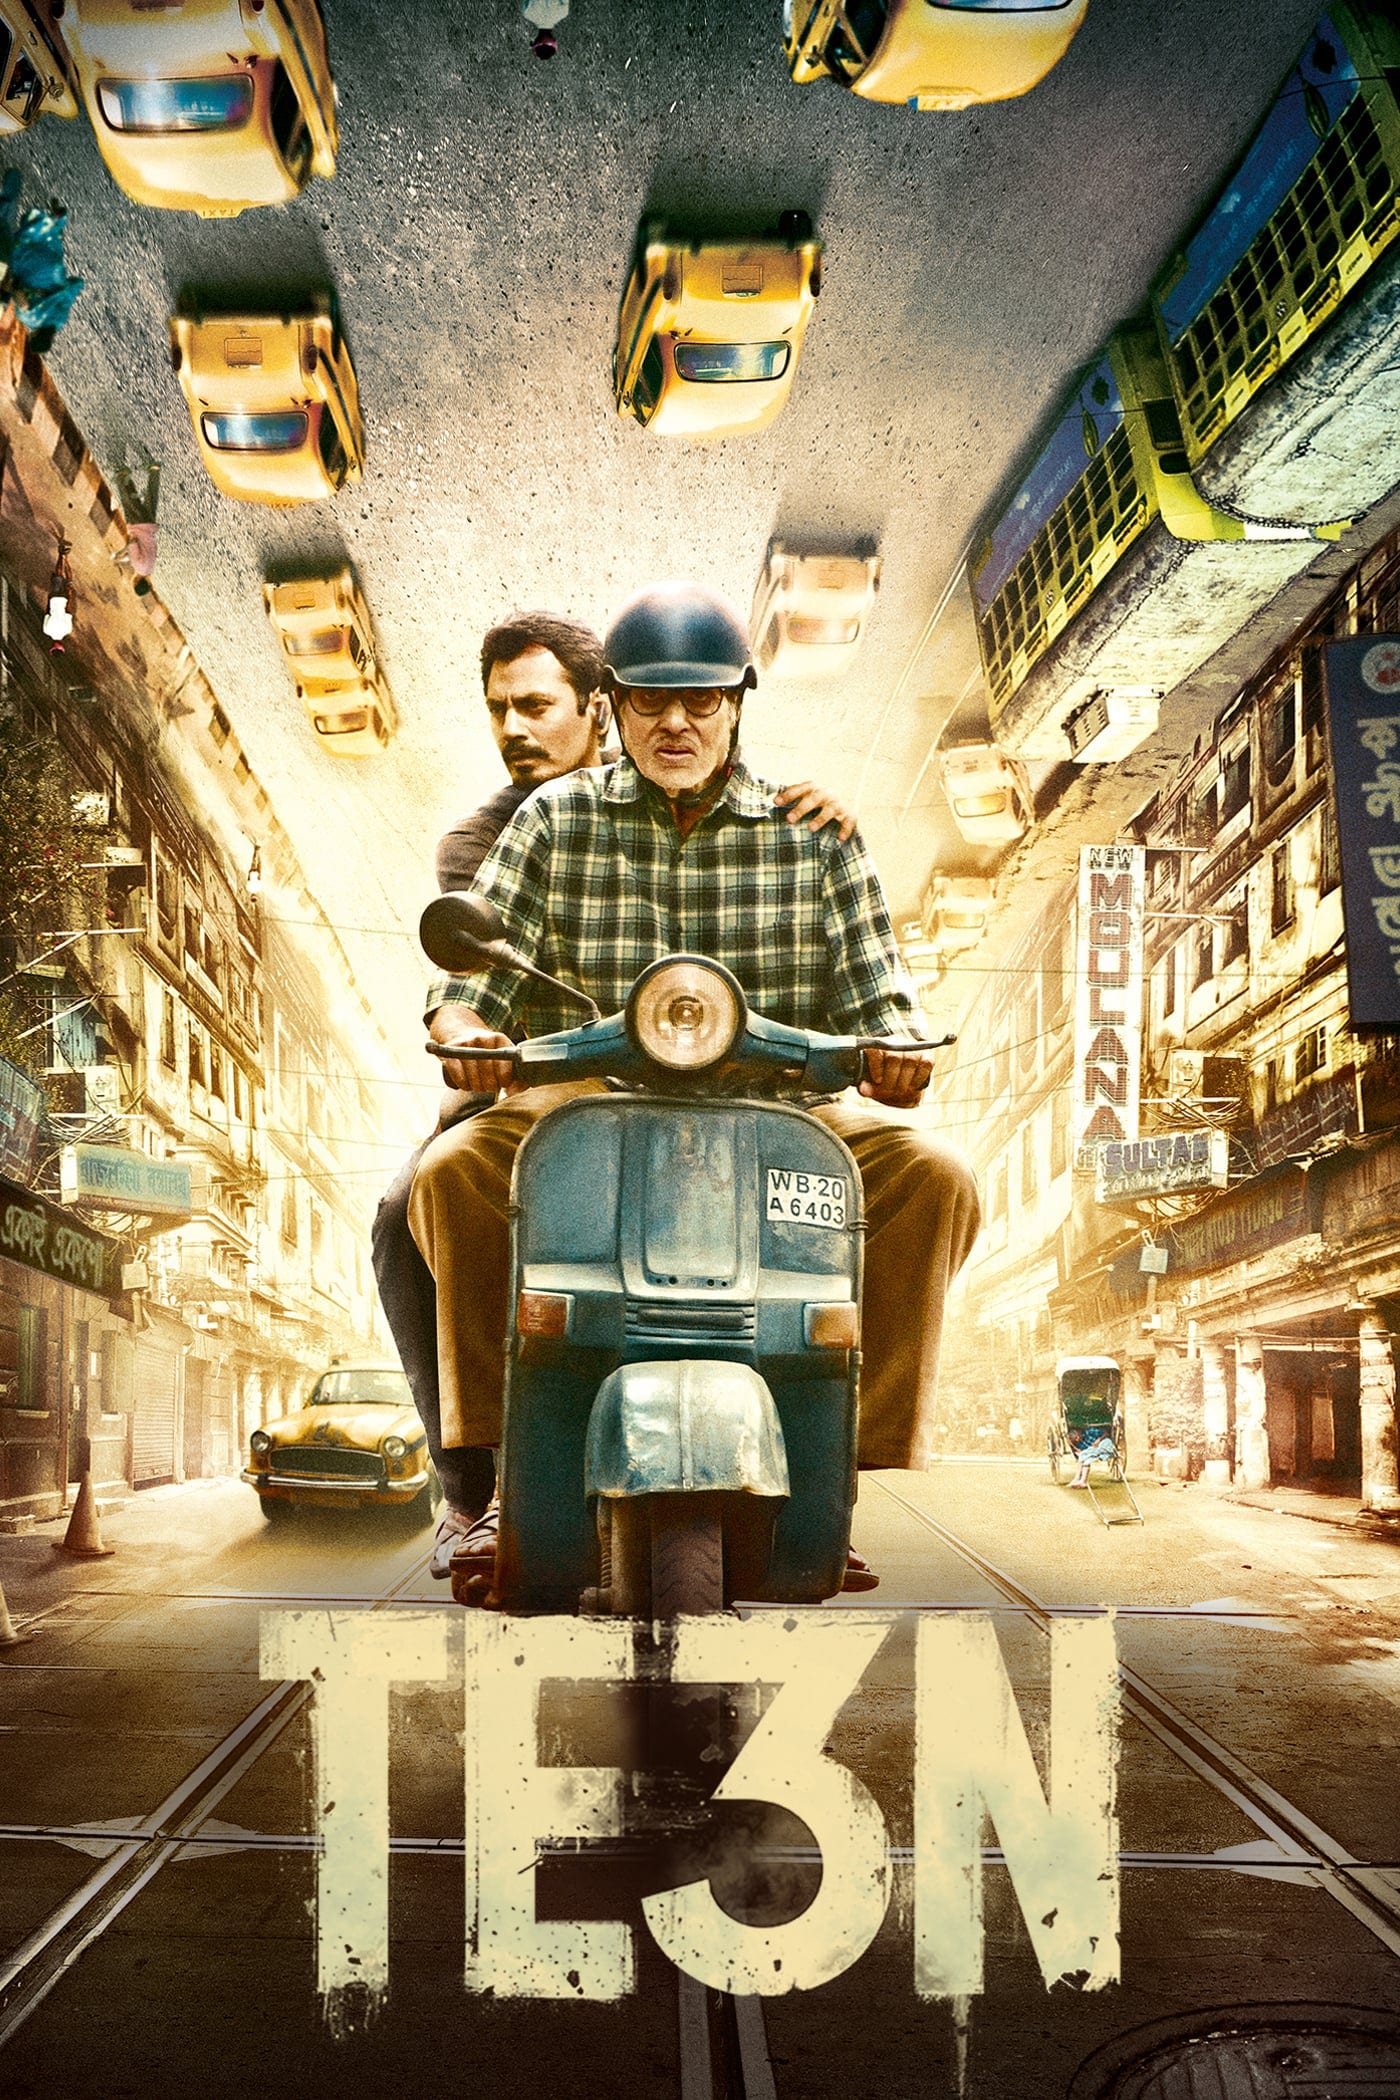 Poster for the movie "Te3n"